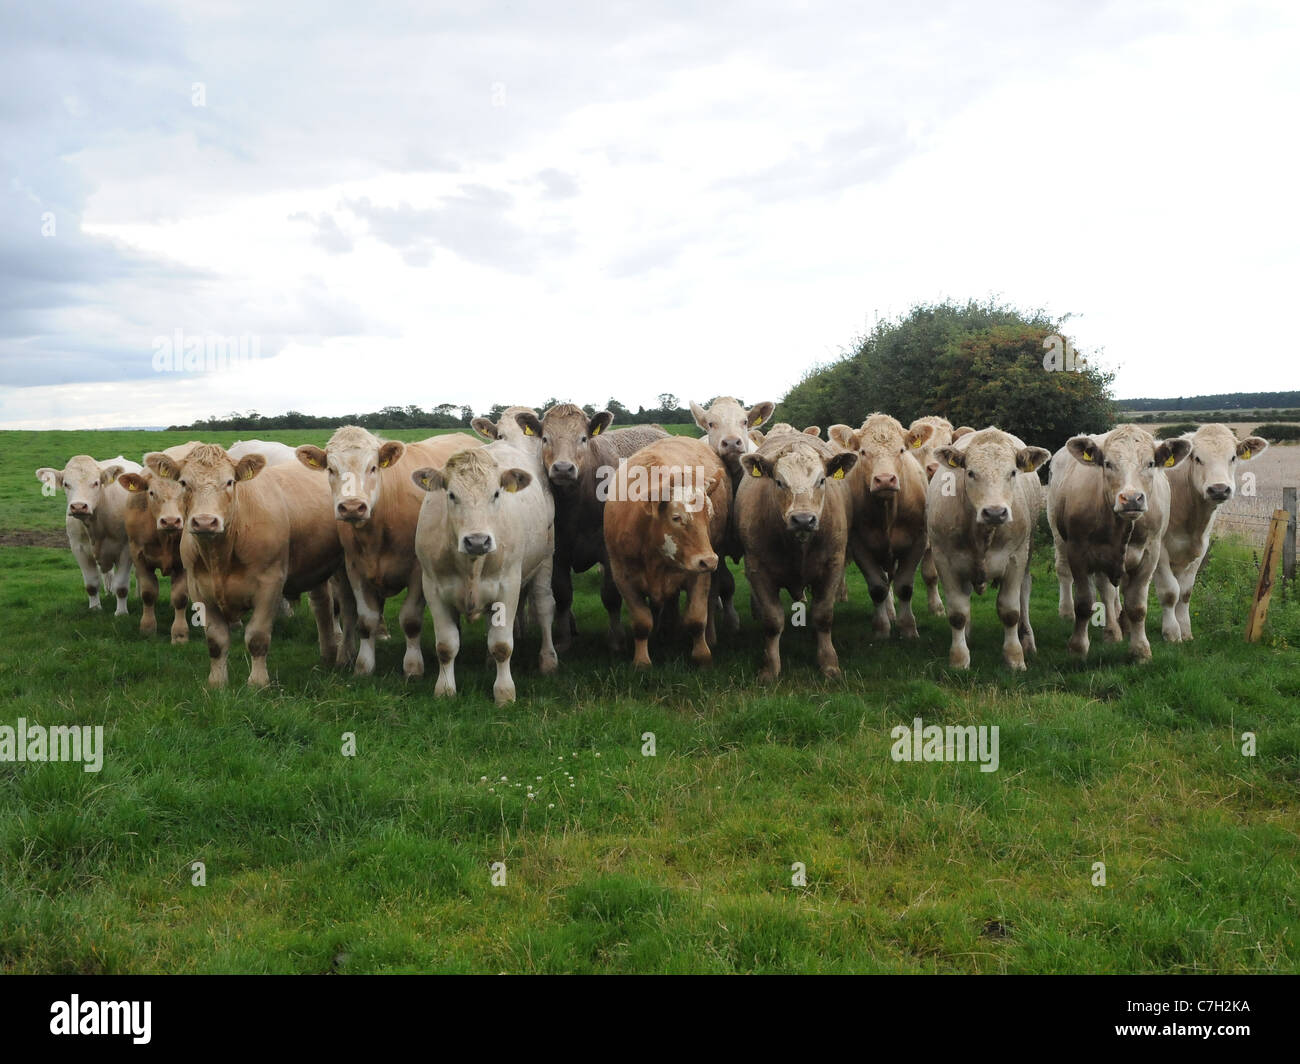 A row of cows all in a line Stock Photo